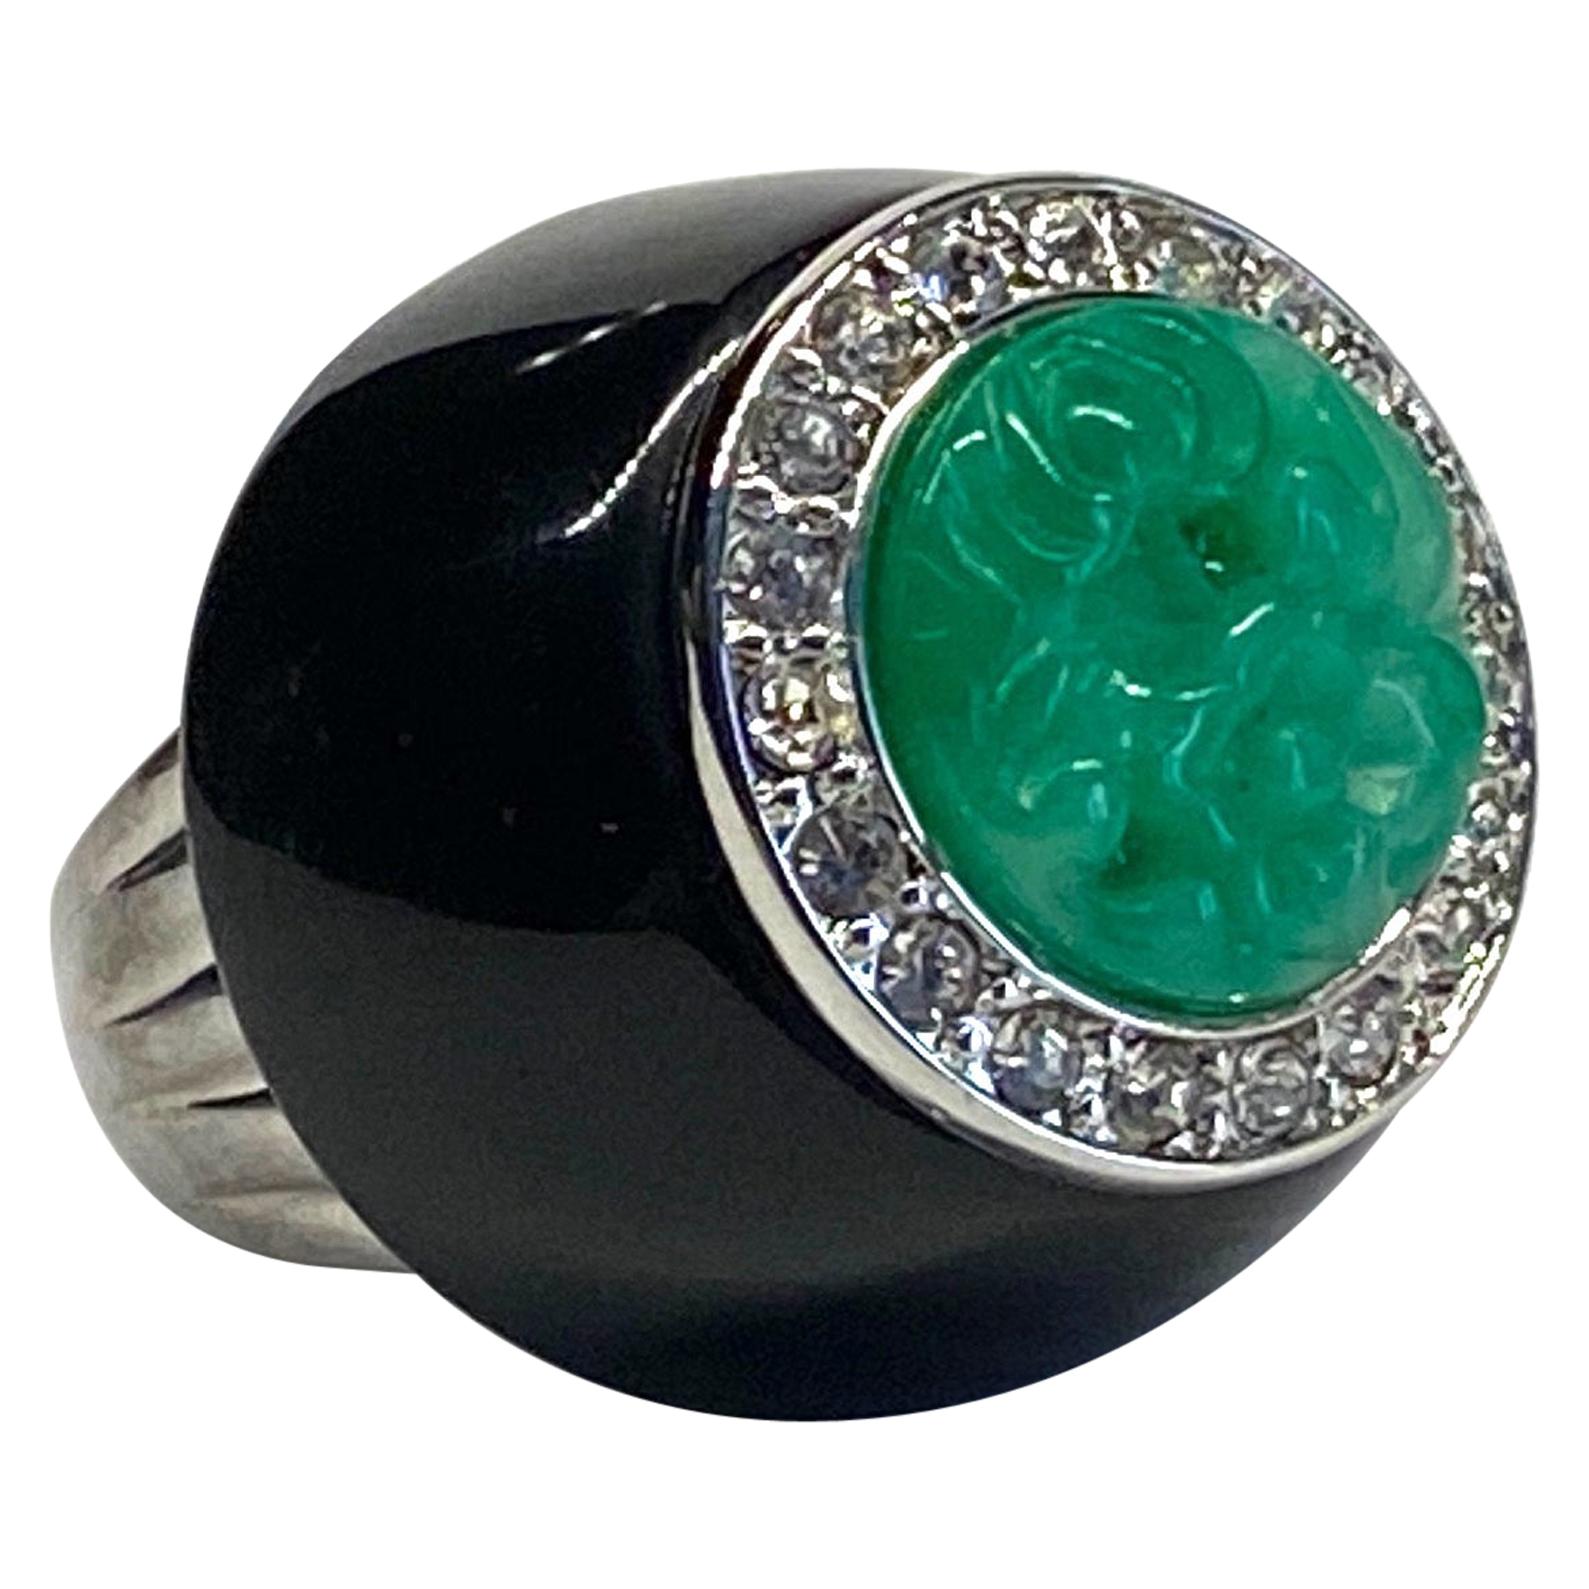 Kenneth Jay Lane 1980s Art Deco Black & Green Dome Ring